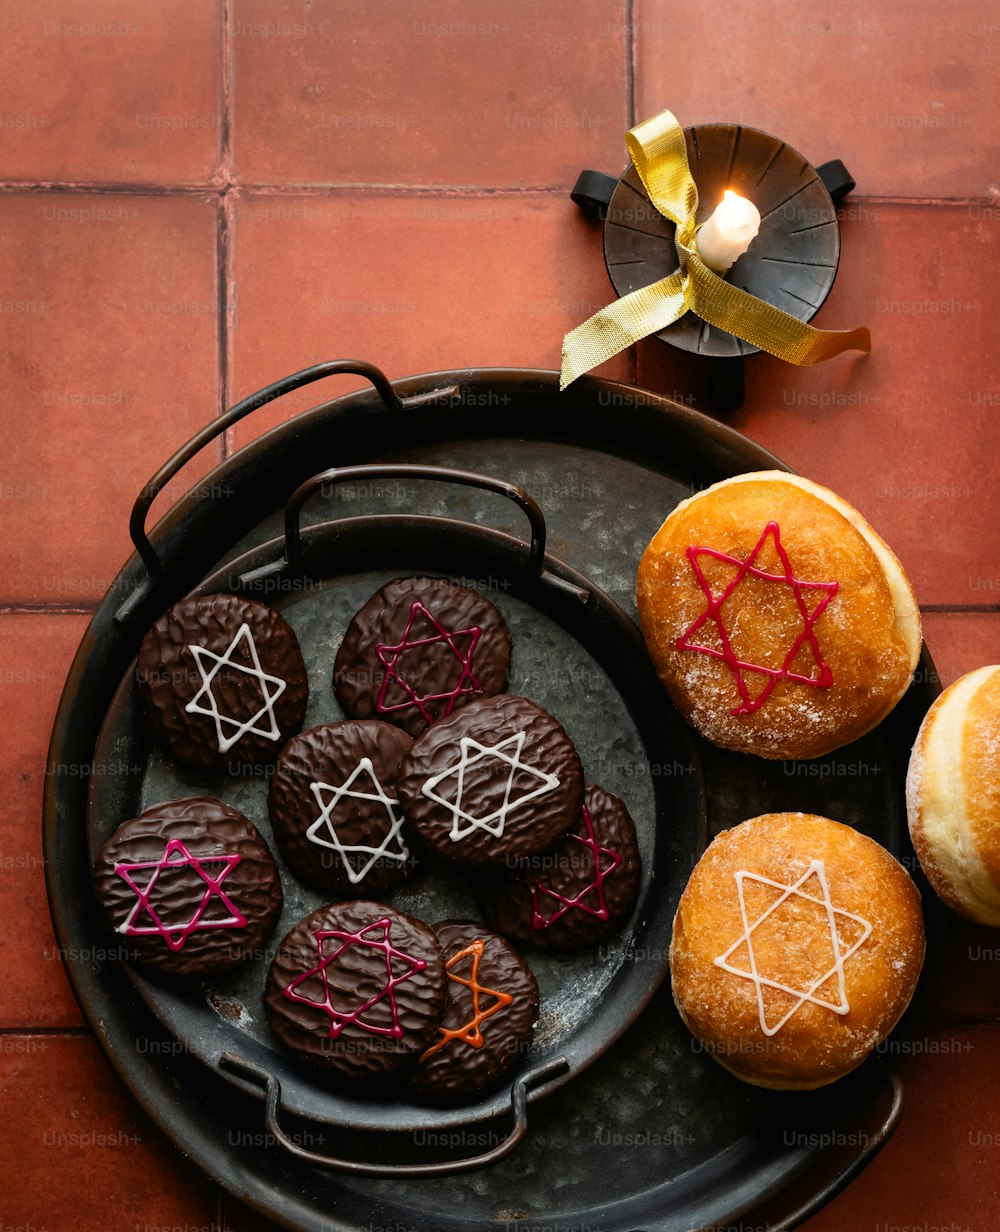 a plate of cookies decorated with a star of david